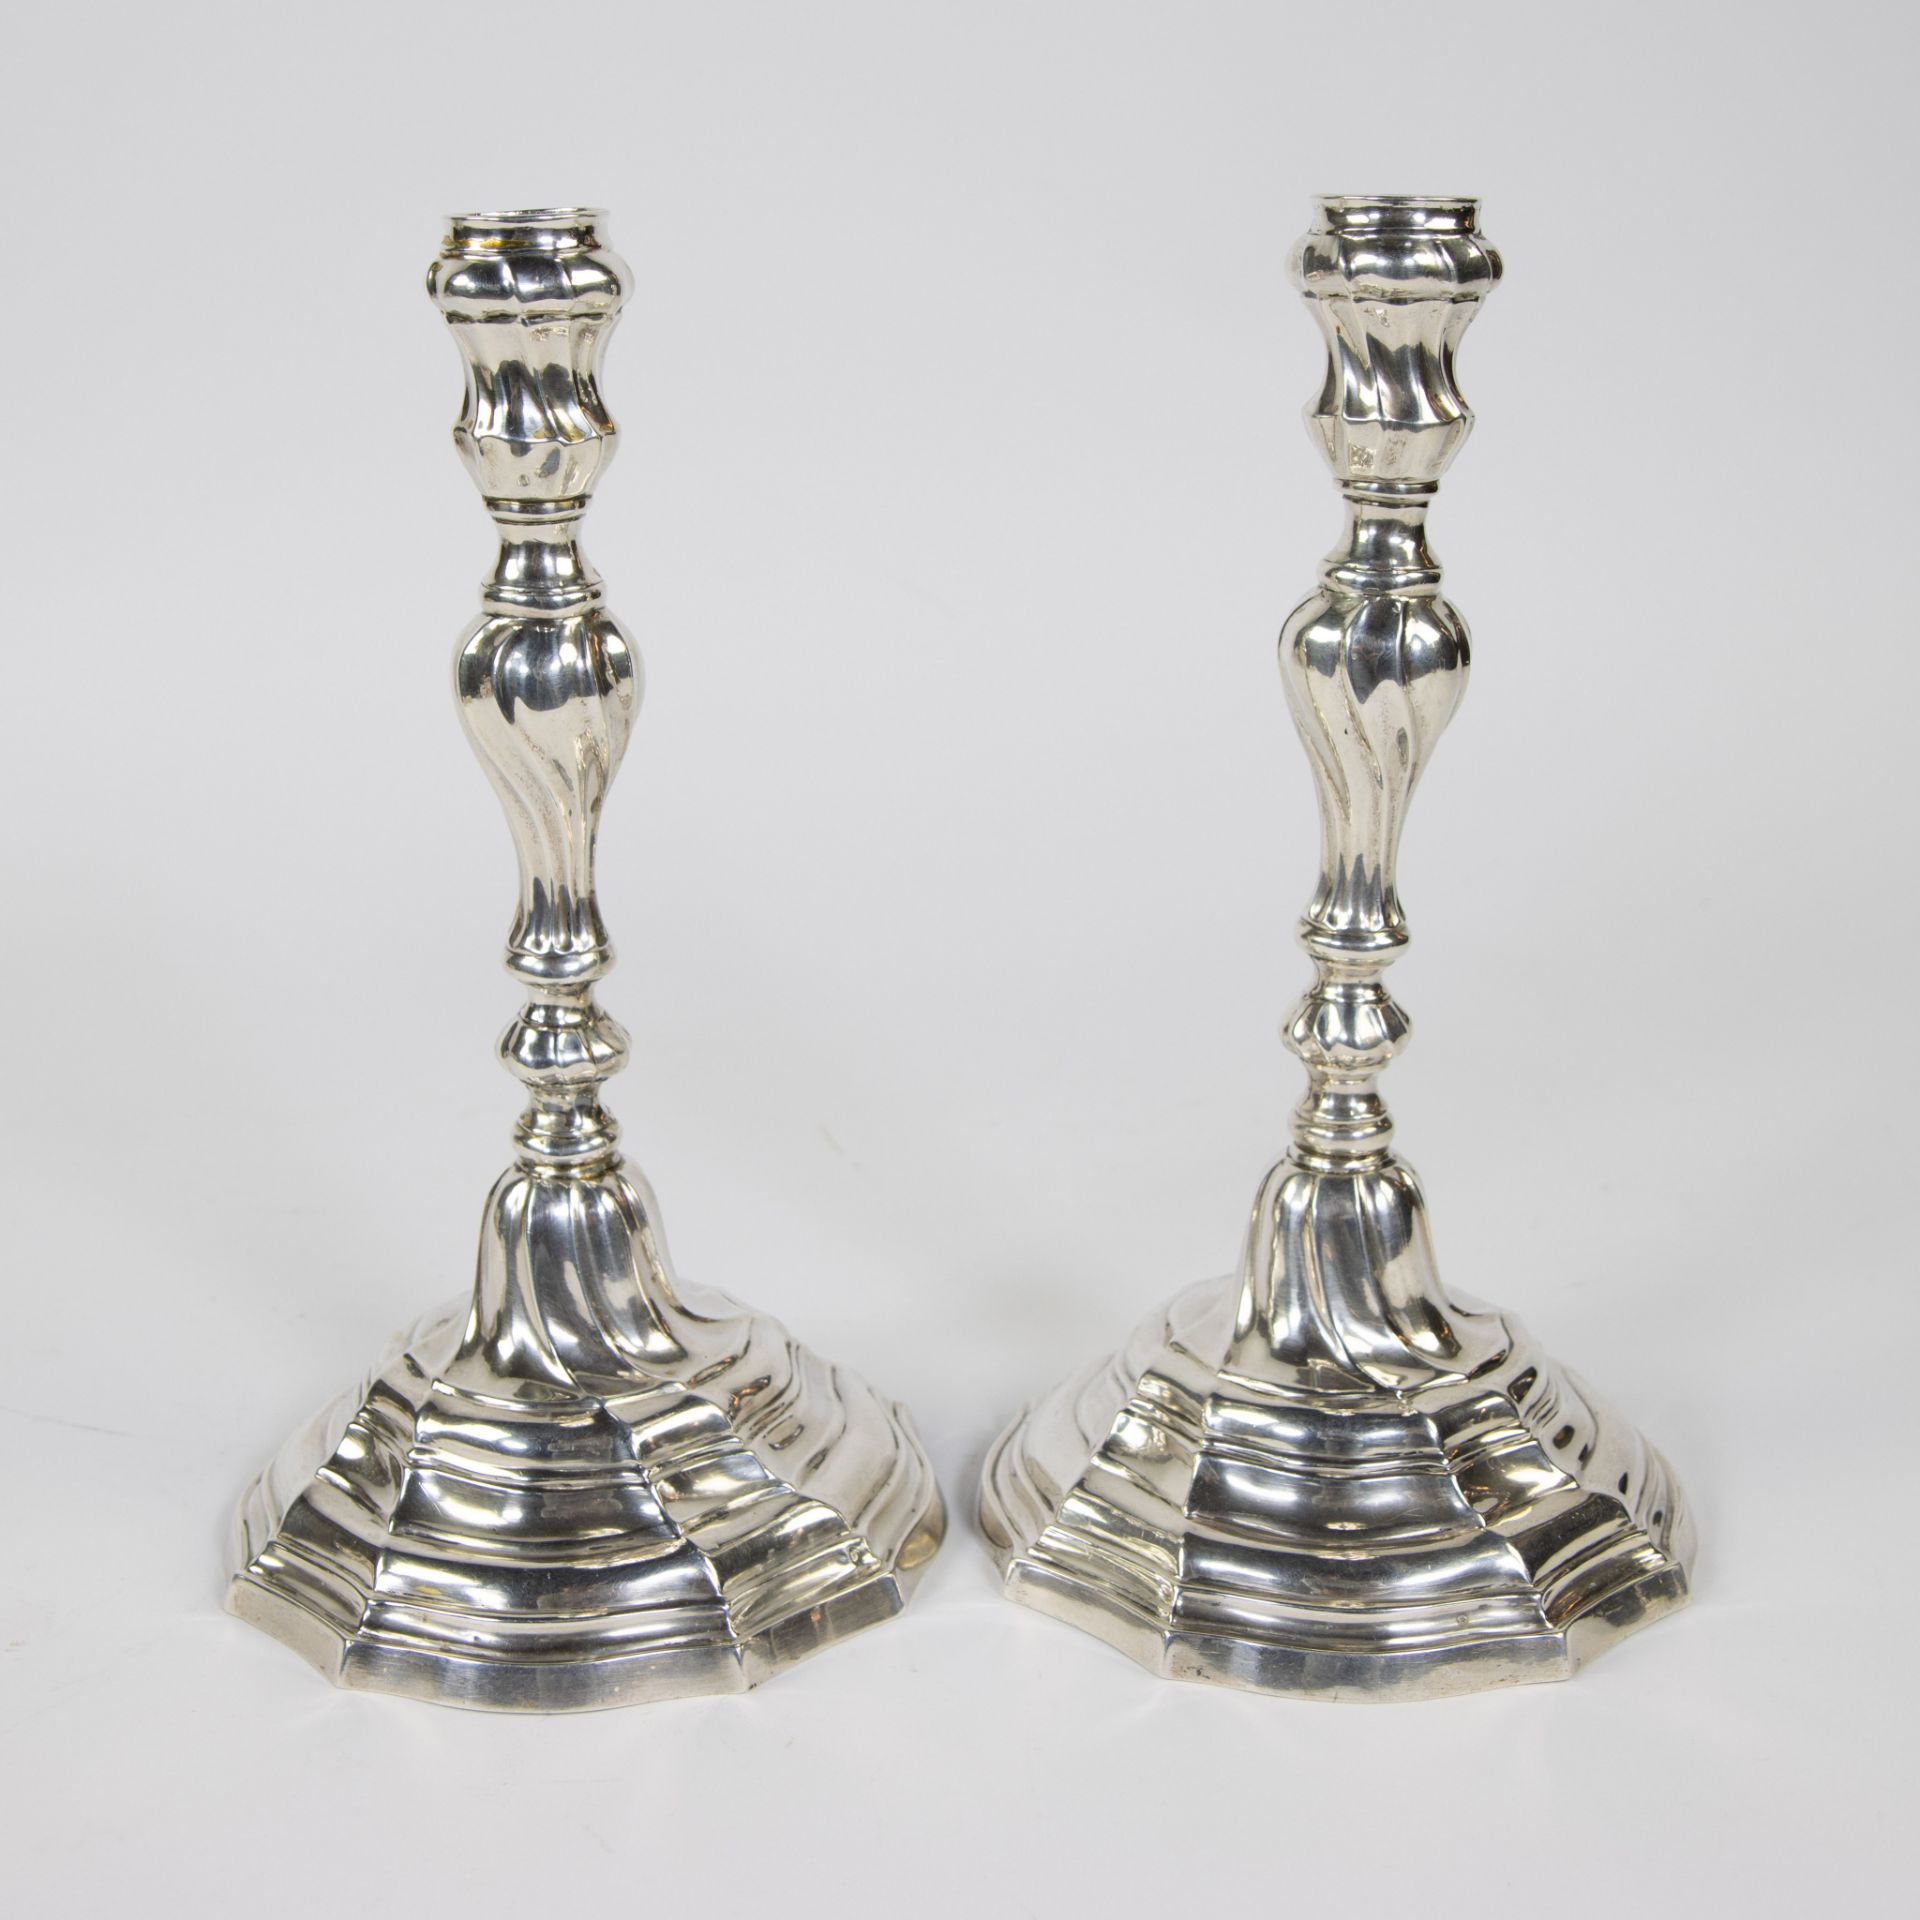 Ghent Louis XV candlesticks, twisted, silver 1774, silversmith Joannes Baptista Paulus - Image 3 of 5